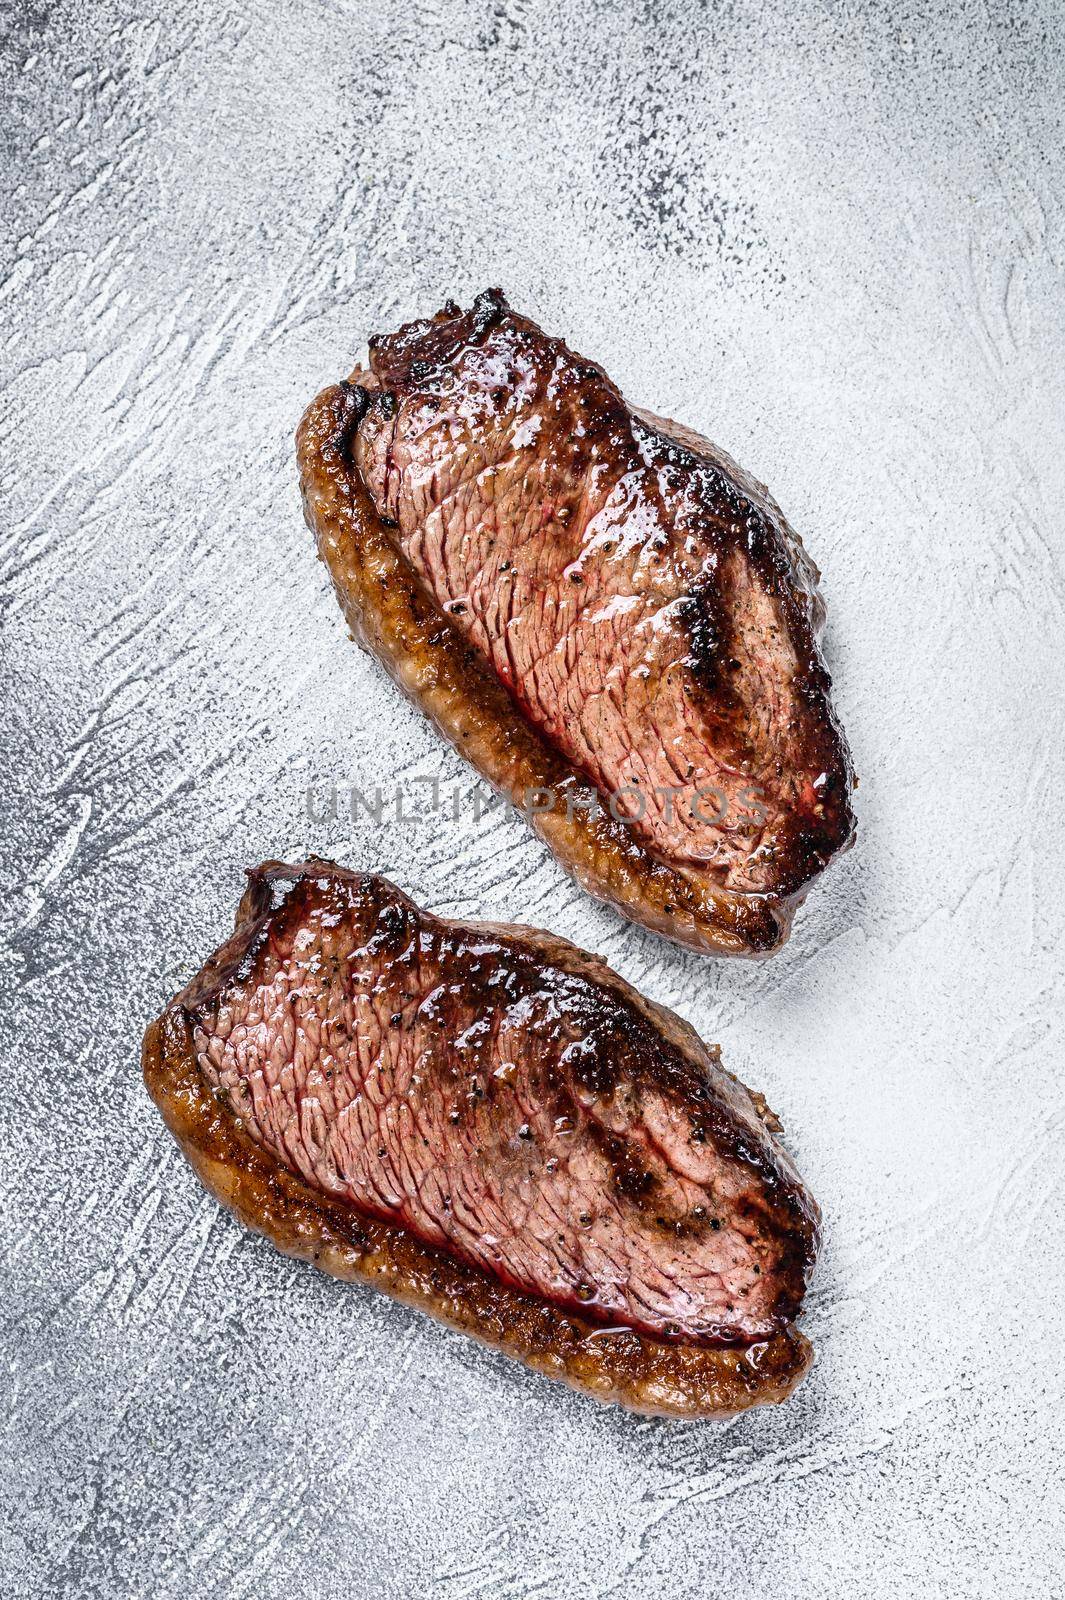 Grilled top sirloin cap or picanha steak. White background. Top view.